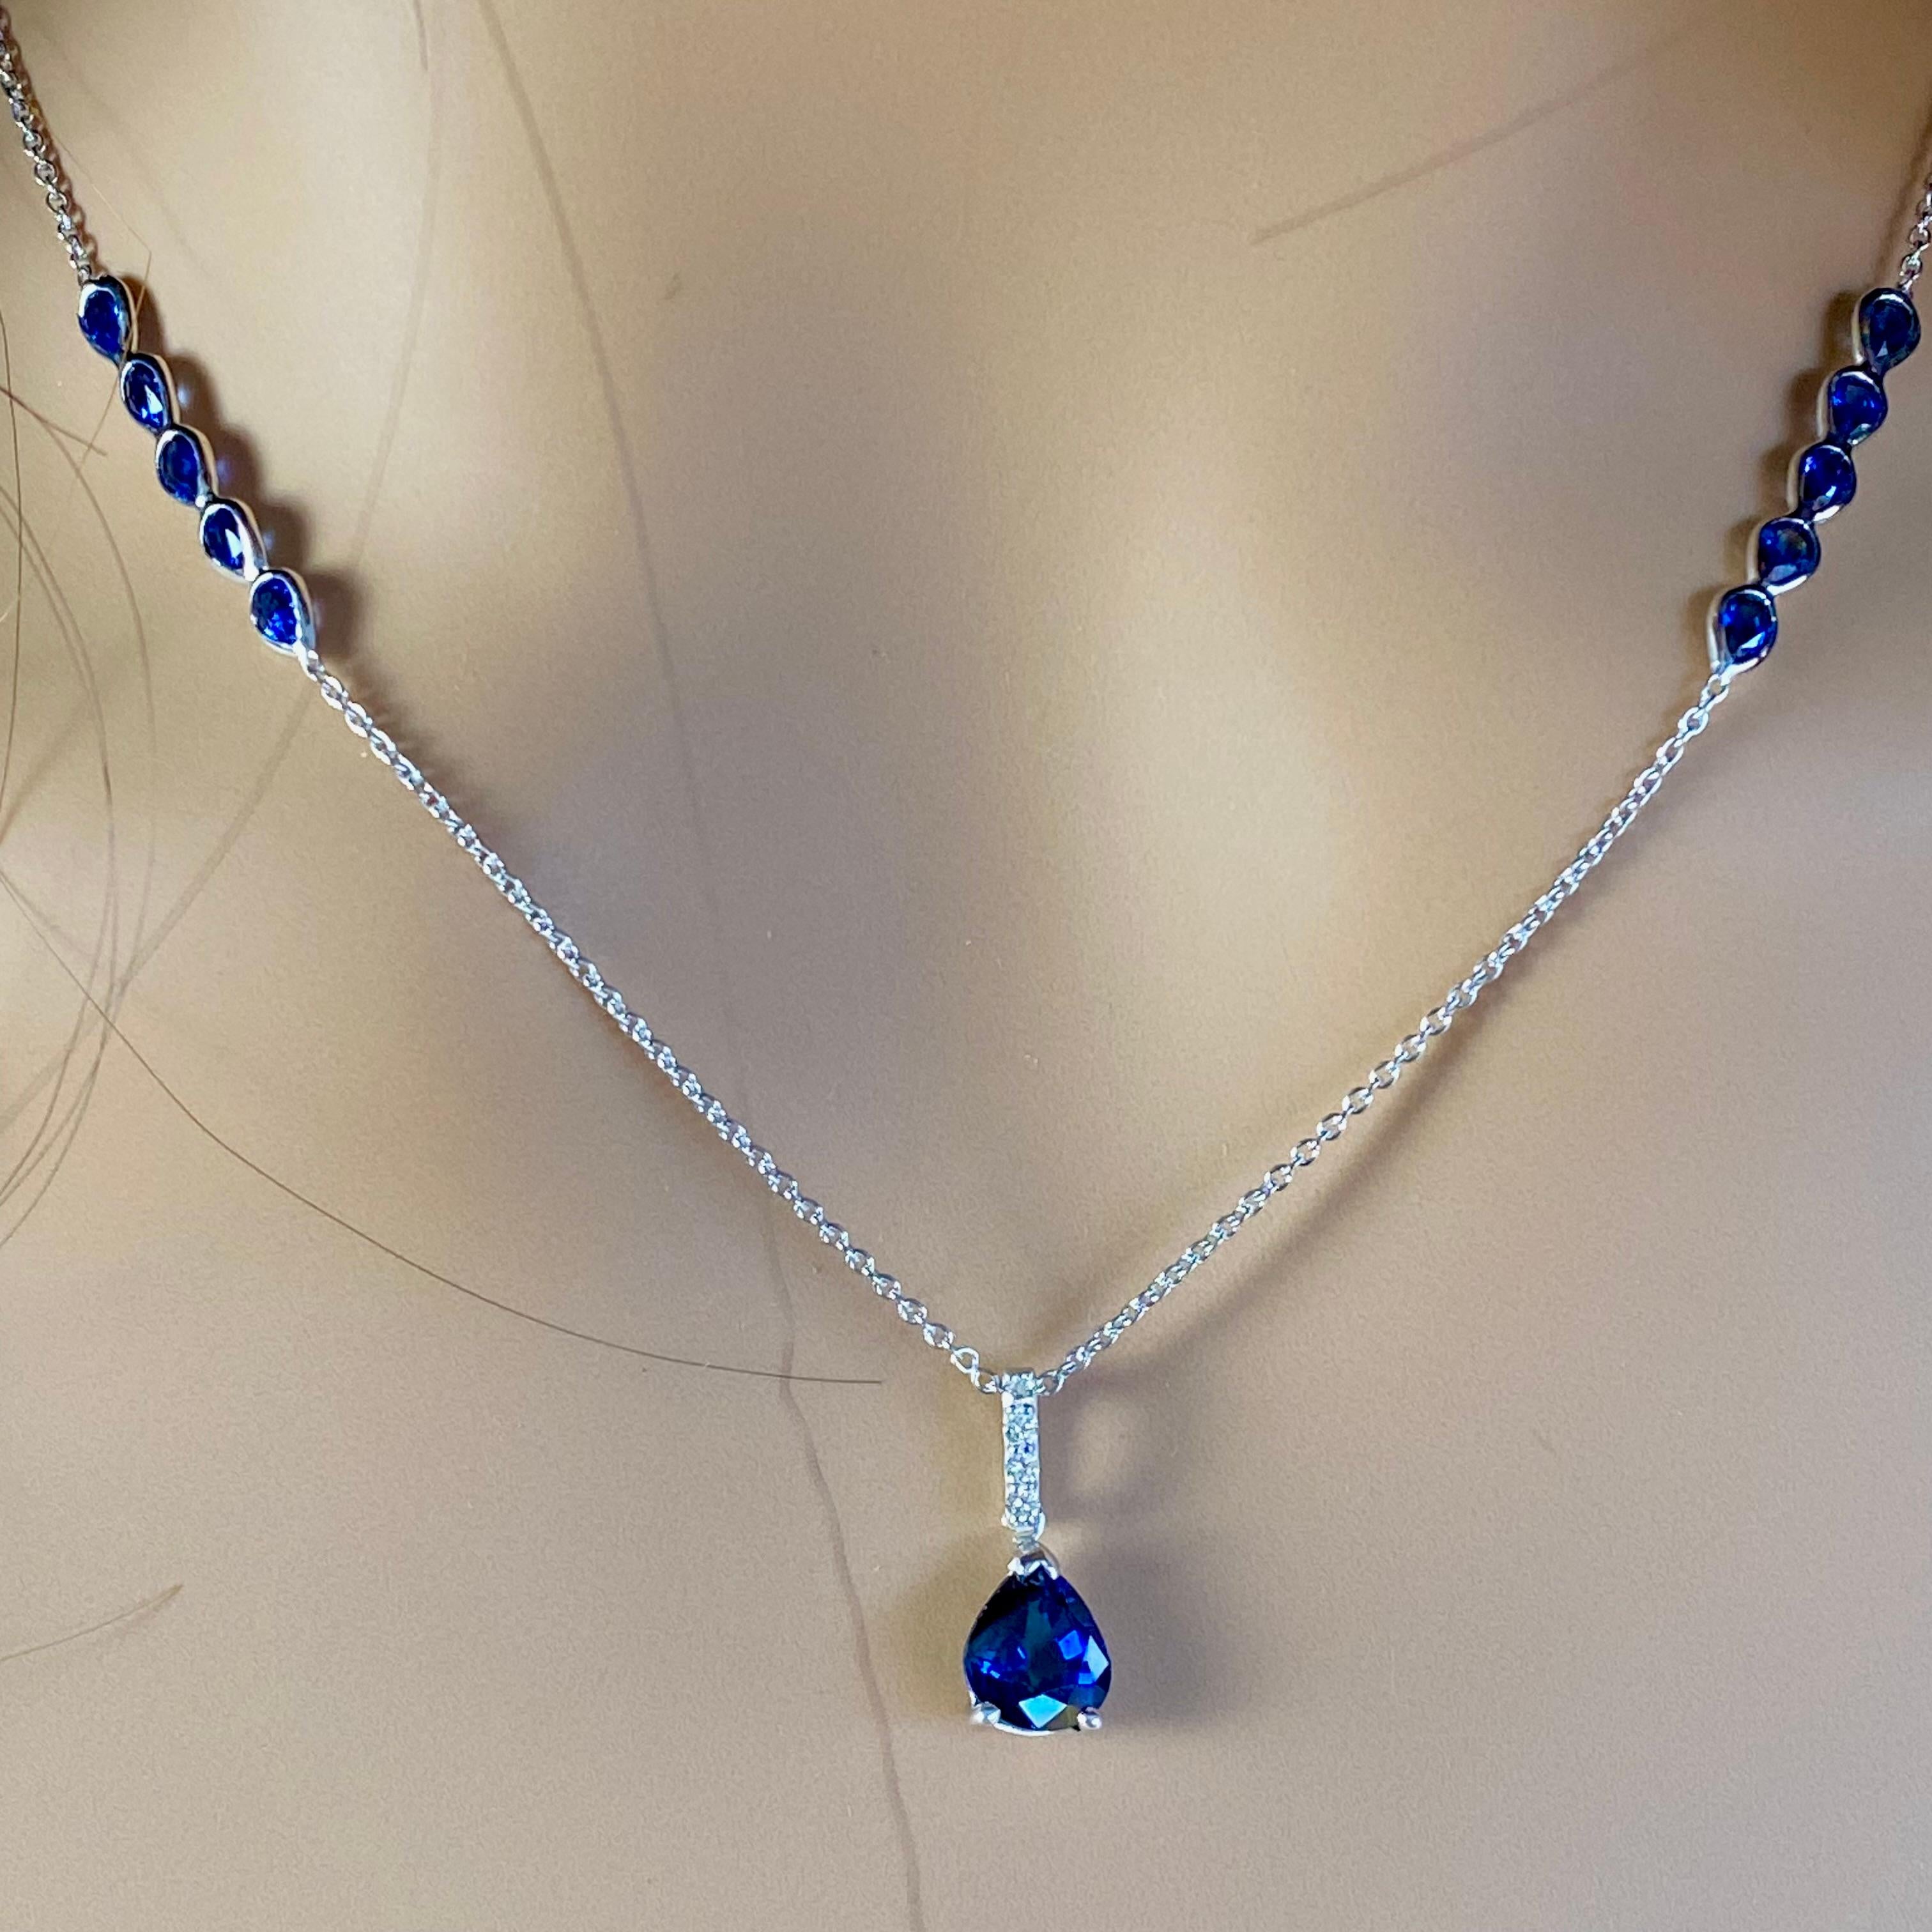 Contemporary Eleven Pear Sapphires Diamonds 4.83 Carat White Gold 19.5 Inch Long Necklace For Sale